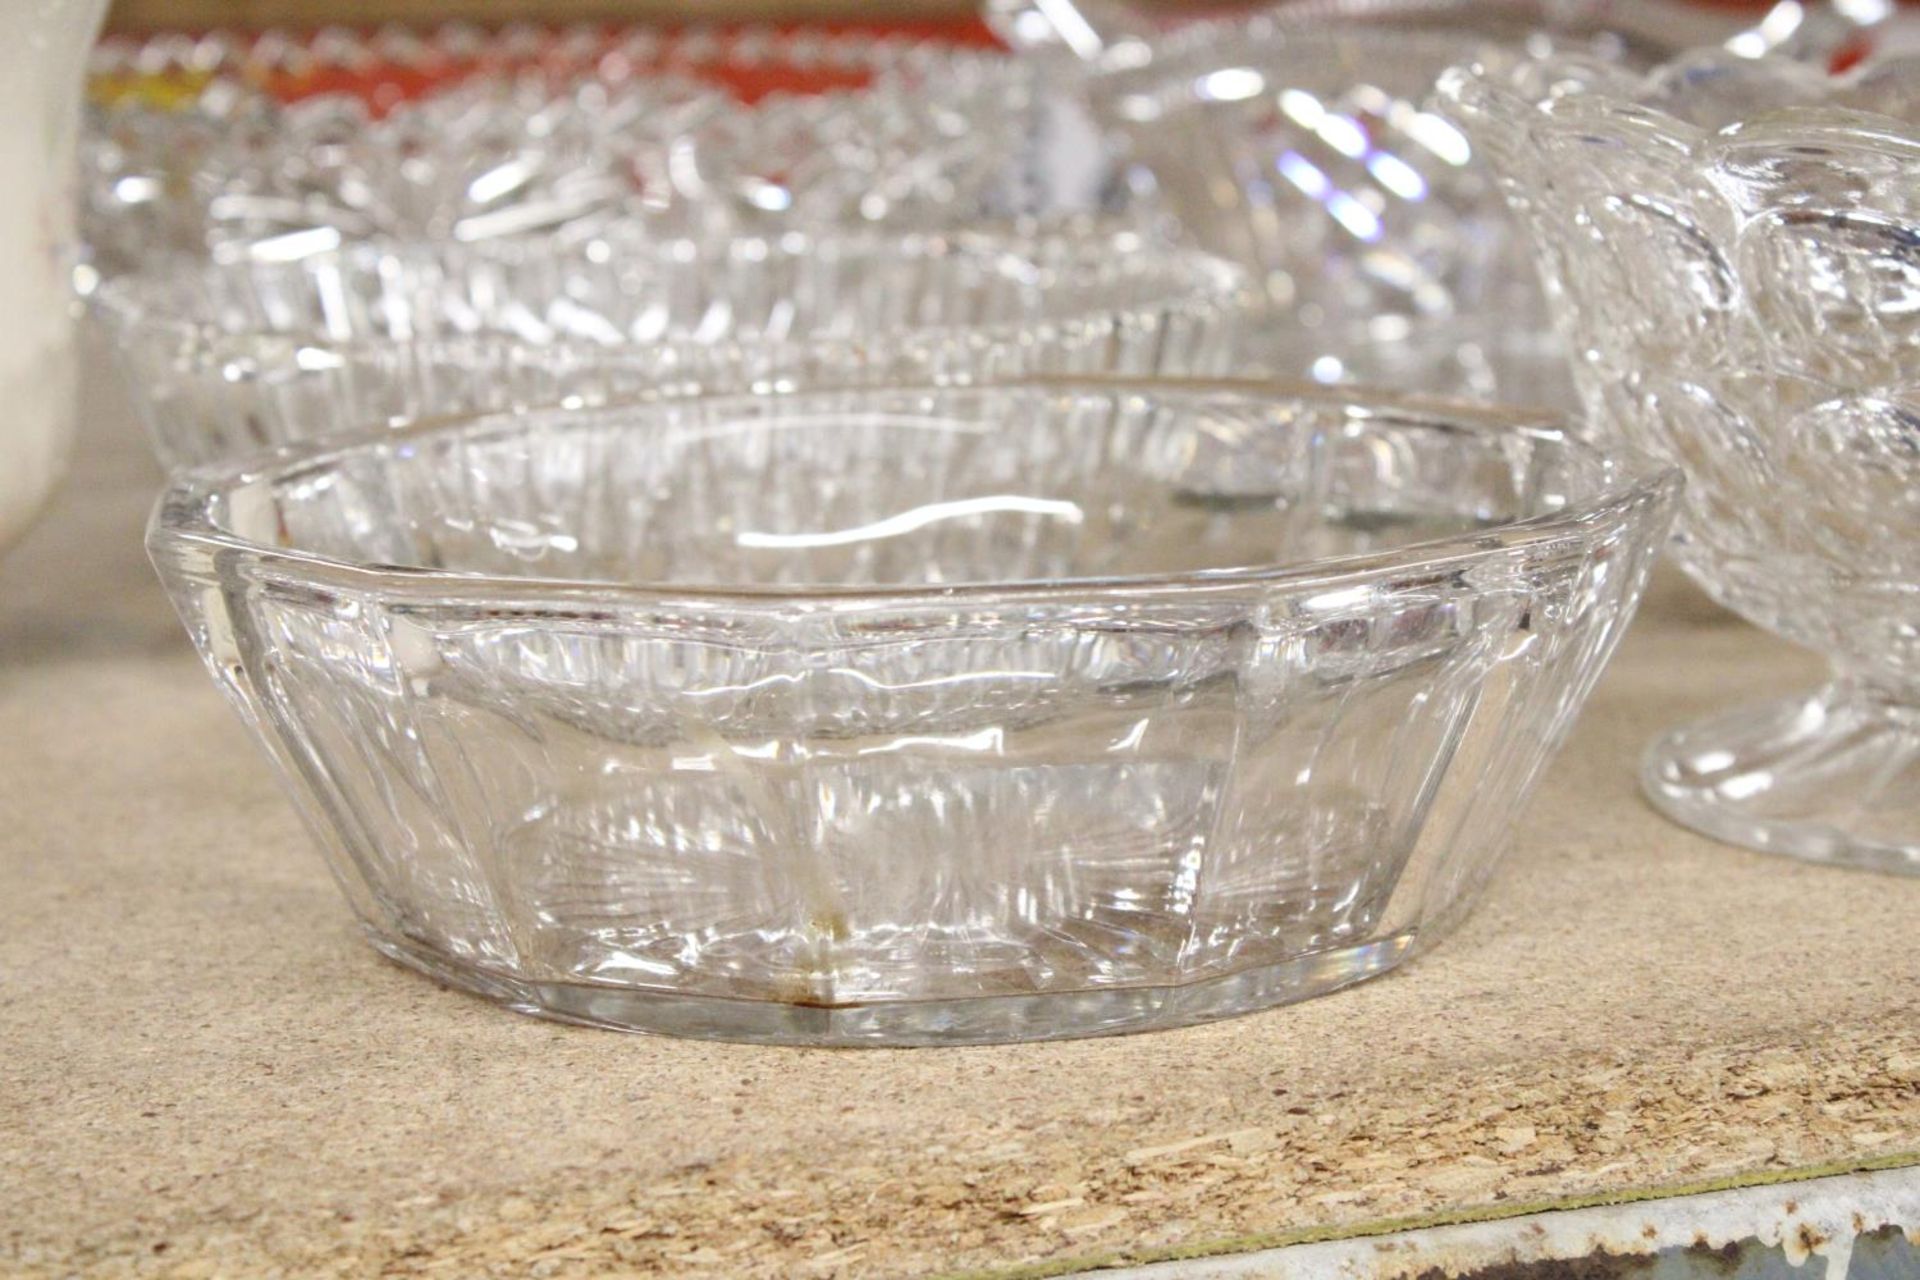 FIVE VINTAGE GLASS BOWLS AND A CAKE PLATE - Image 2 of 5